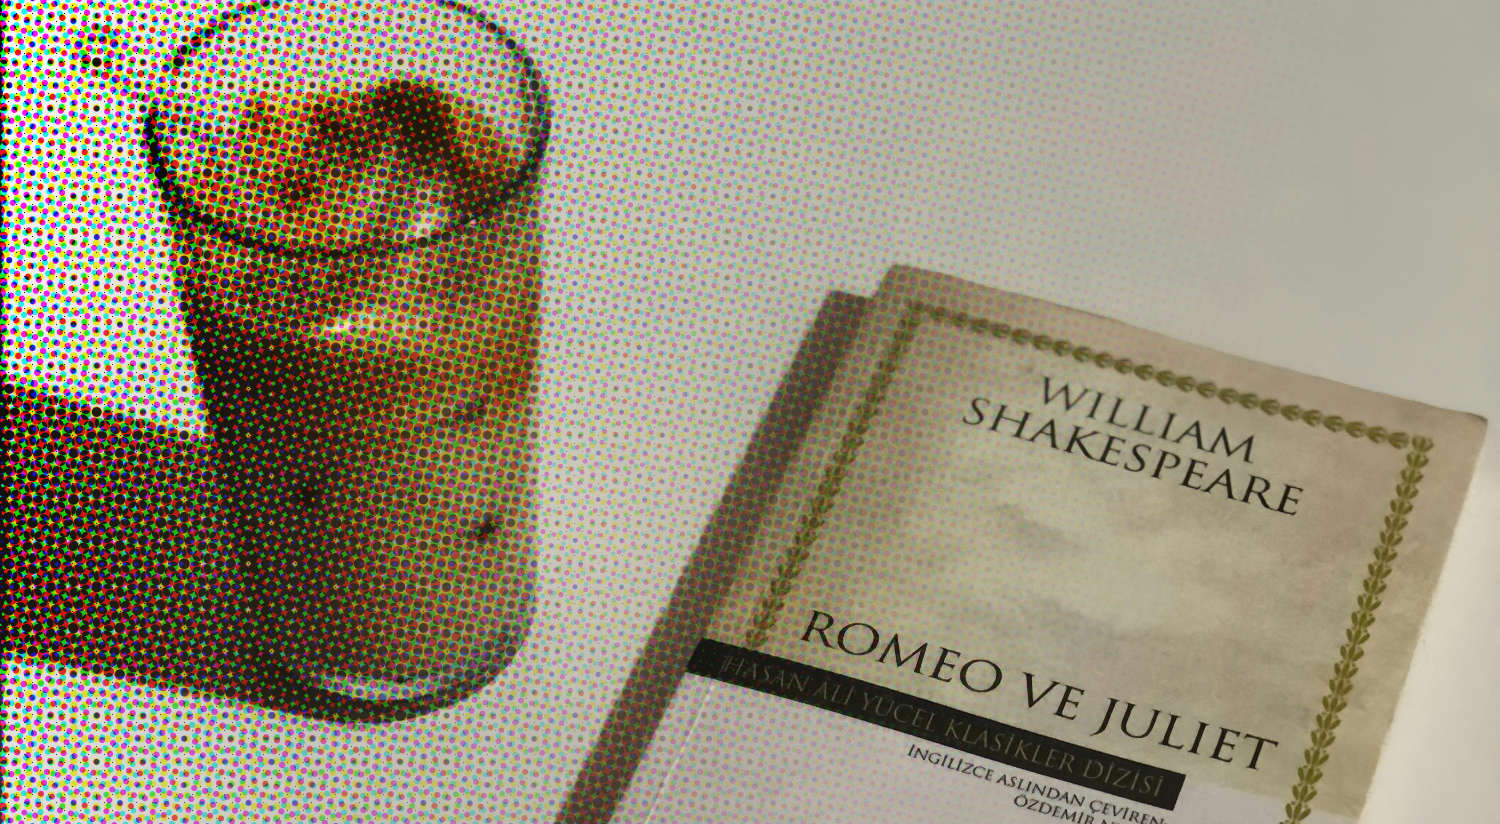 Book of Romeo and Juliet set next to an iced coffee